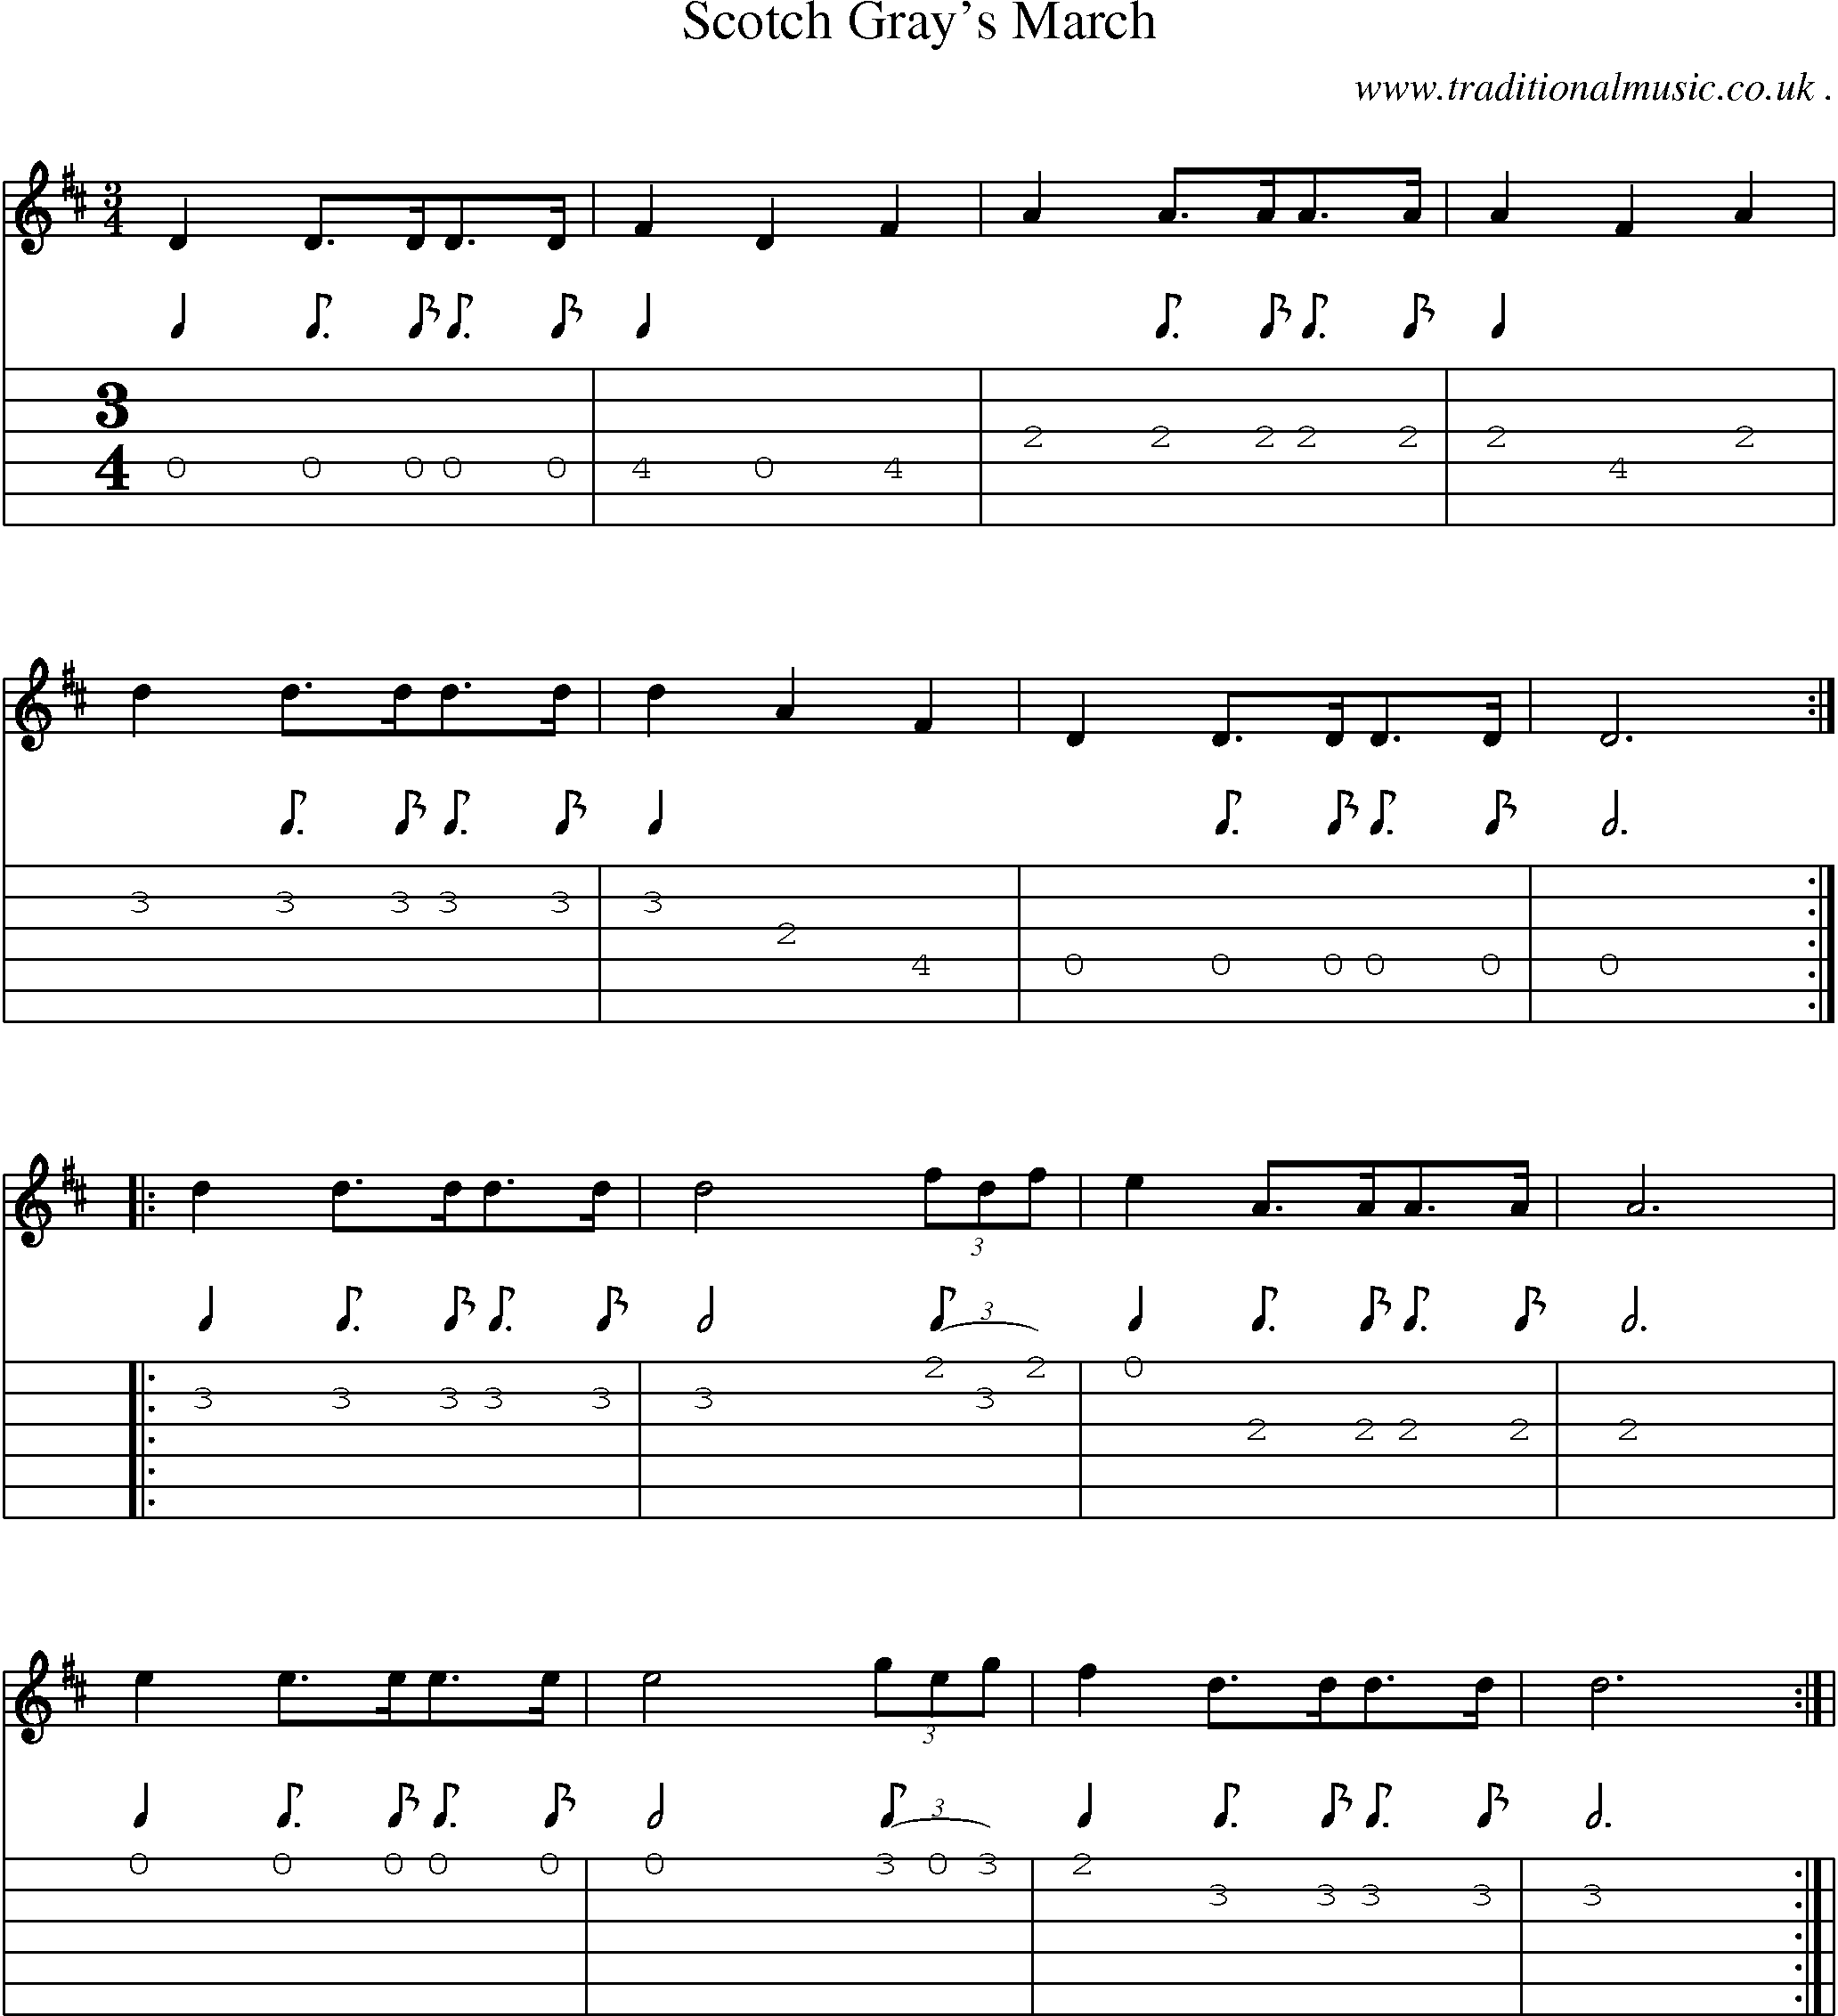 Sheet-Music and Guitar Tabs for Scotch Grays March